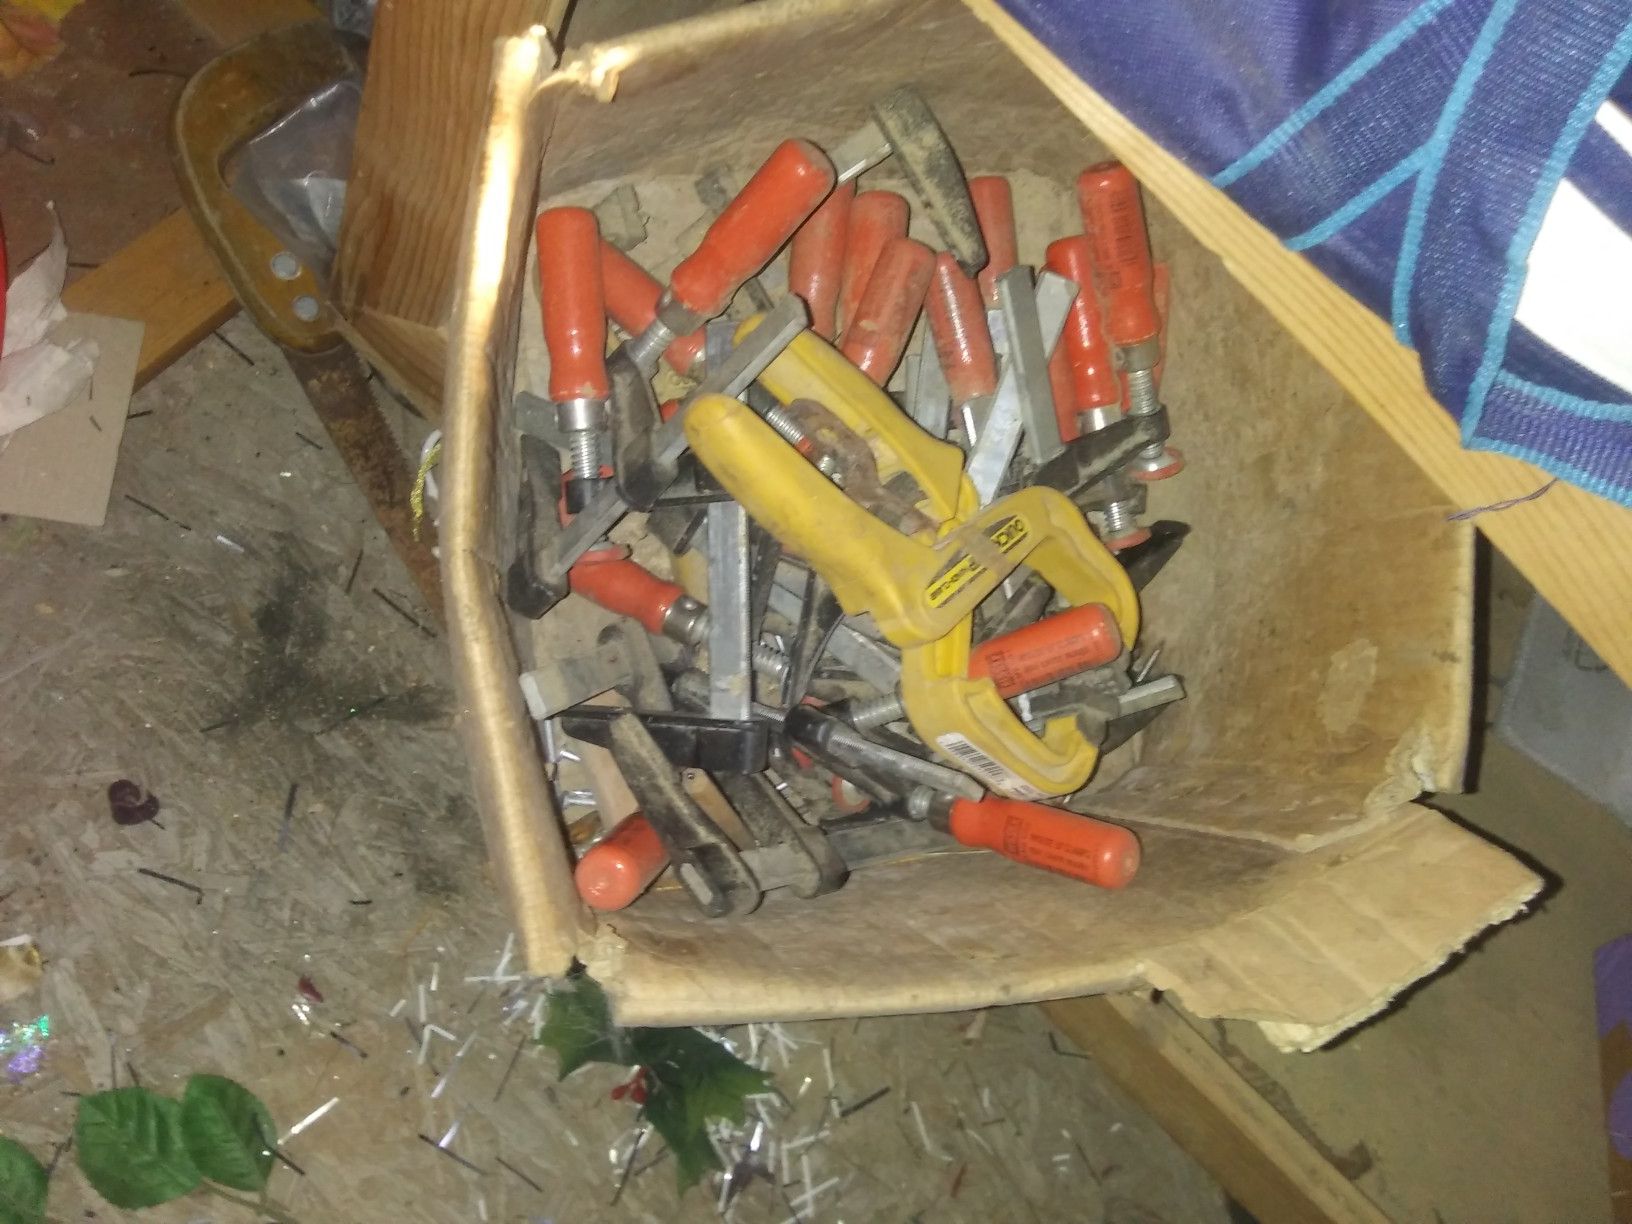 Box full of wood clamps